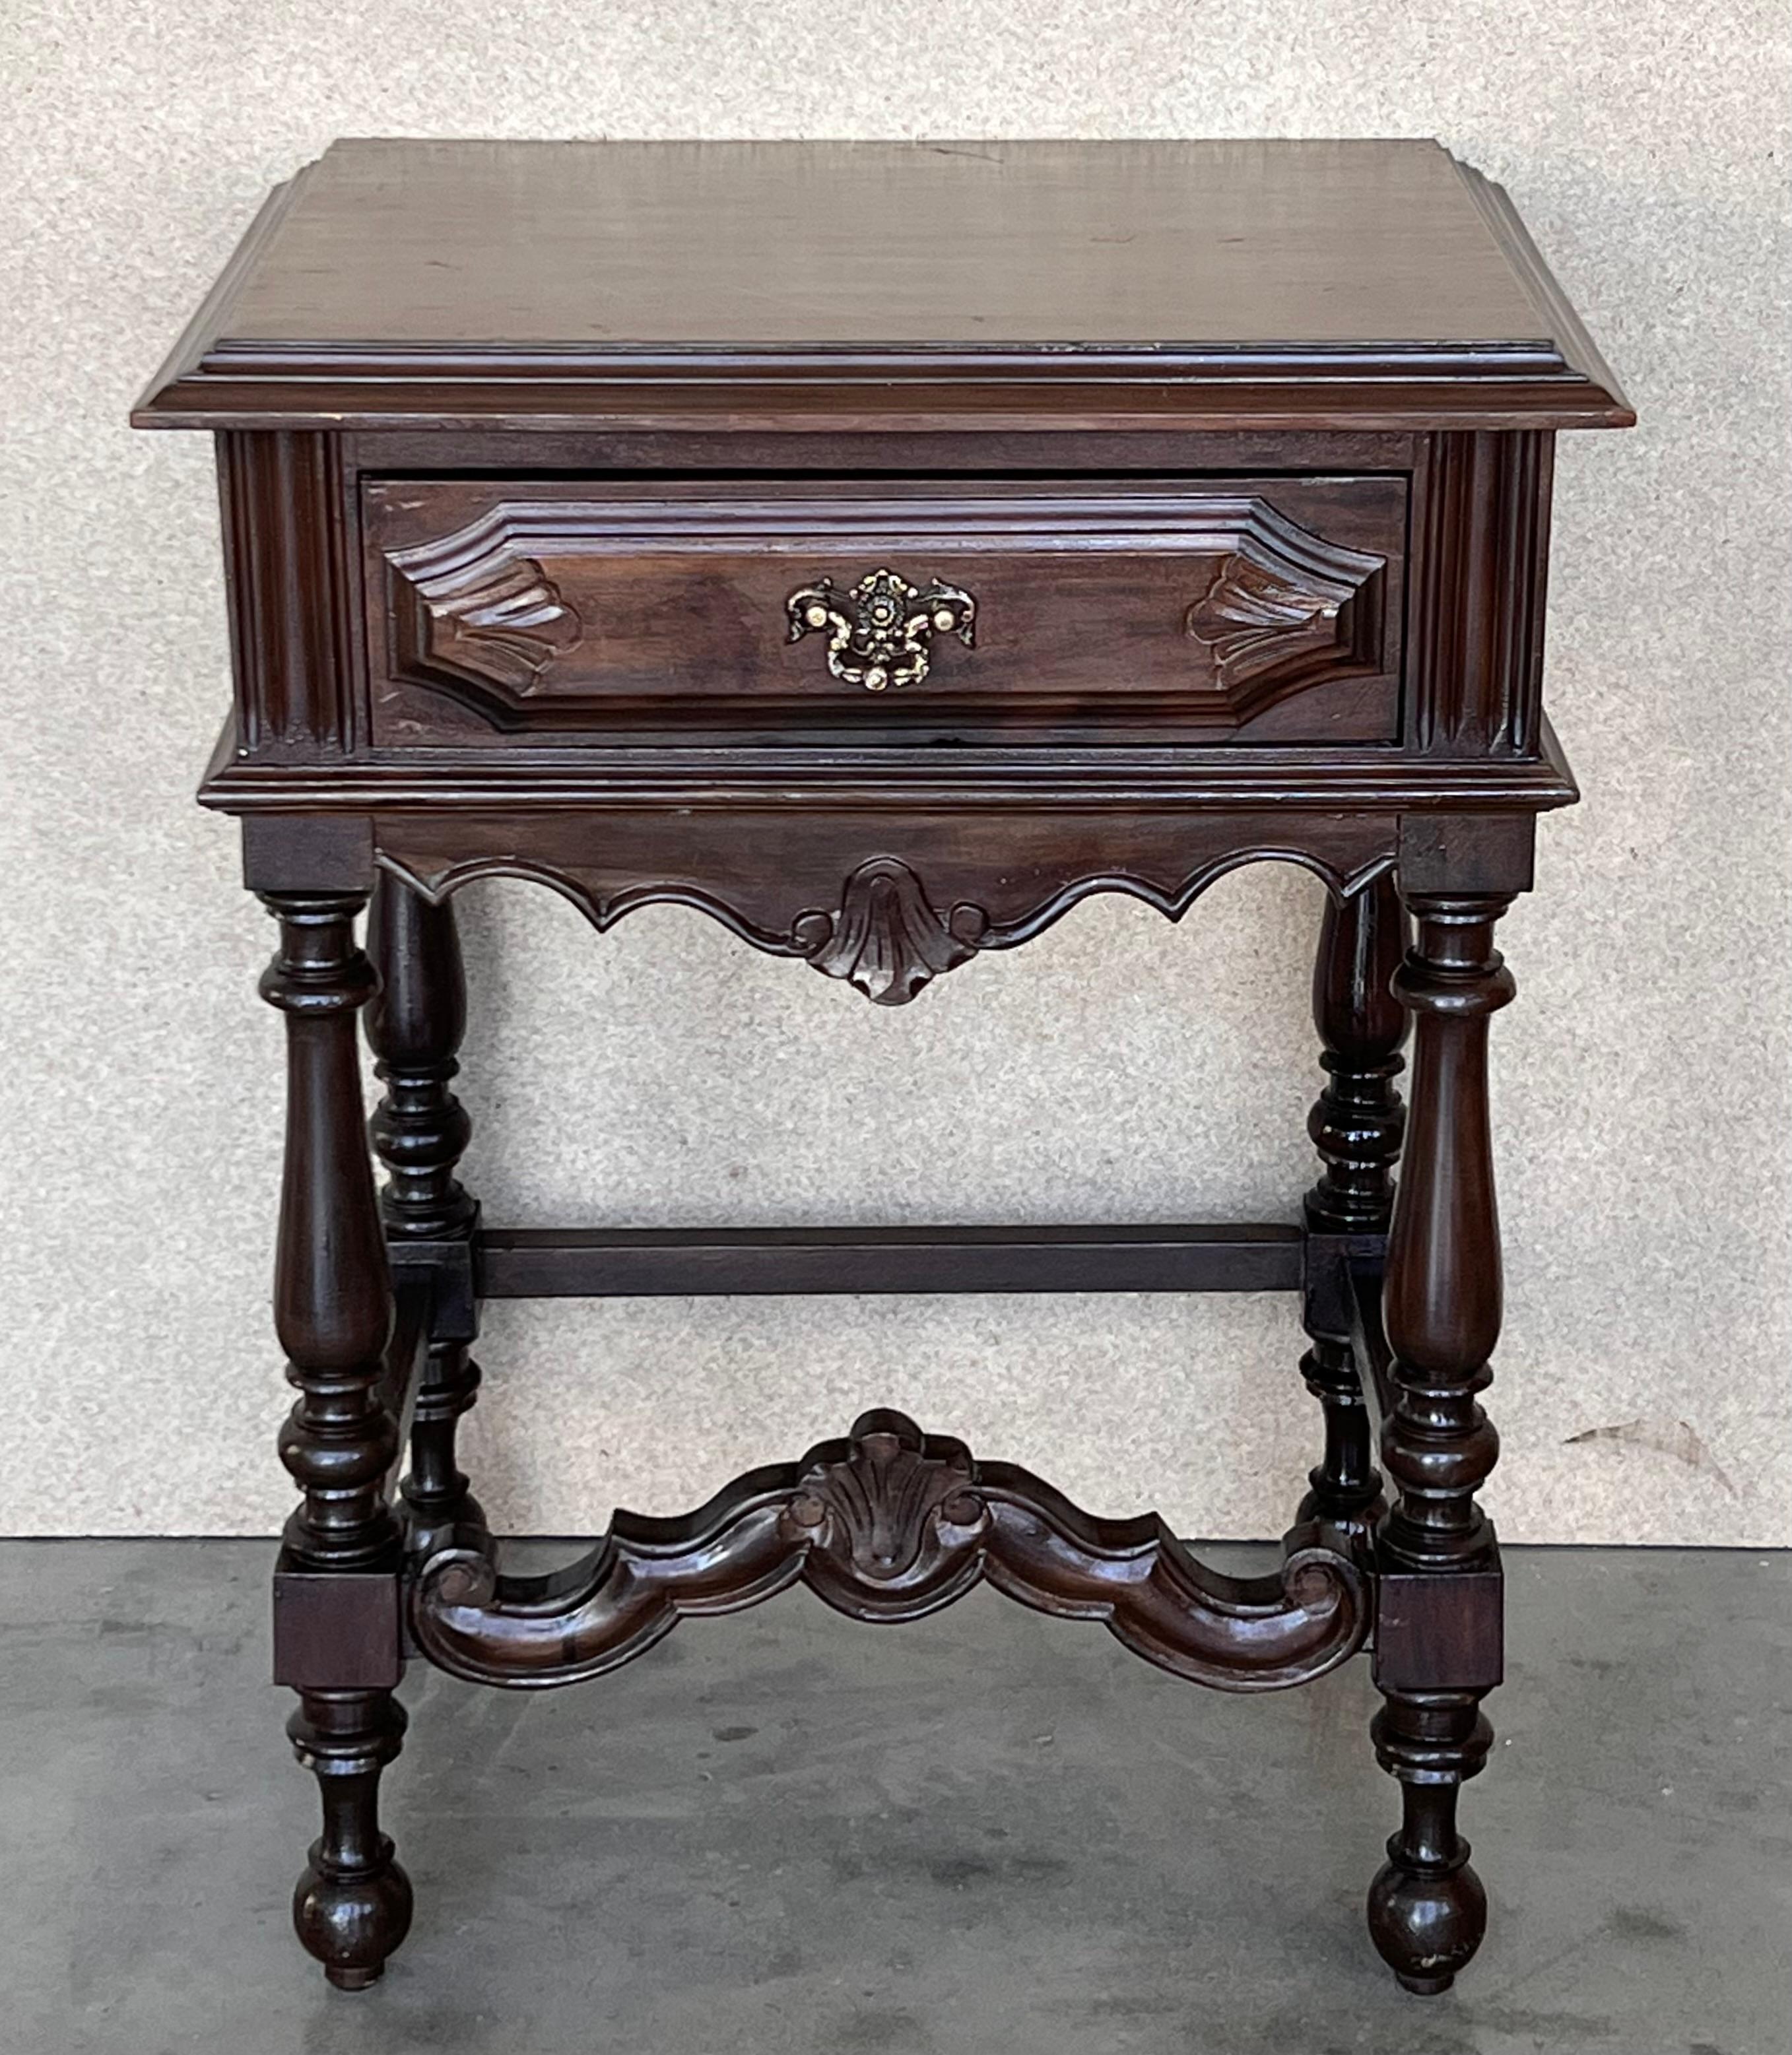 20th century Pair of Spanish nightstands or console table with one drawer and iron hardware. The table has beautiful carved drawers with original iron pull. Beautiful tables that you can use like a nightstands or side tables, end tables or table